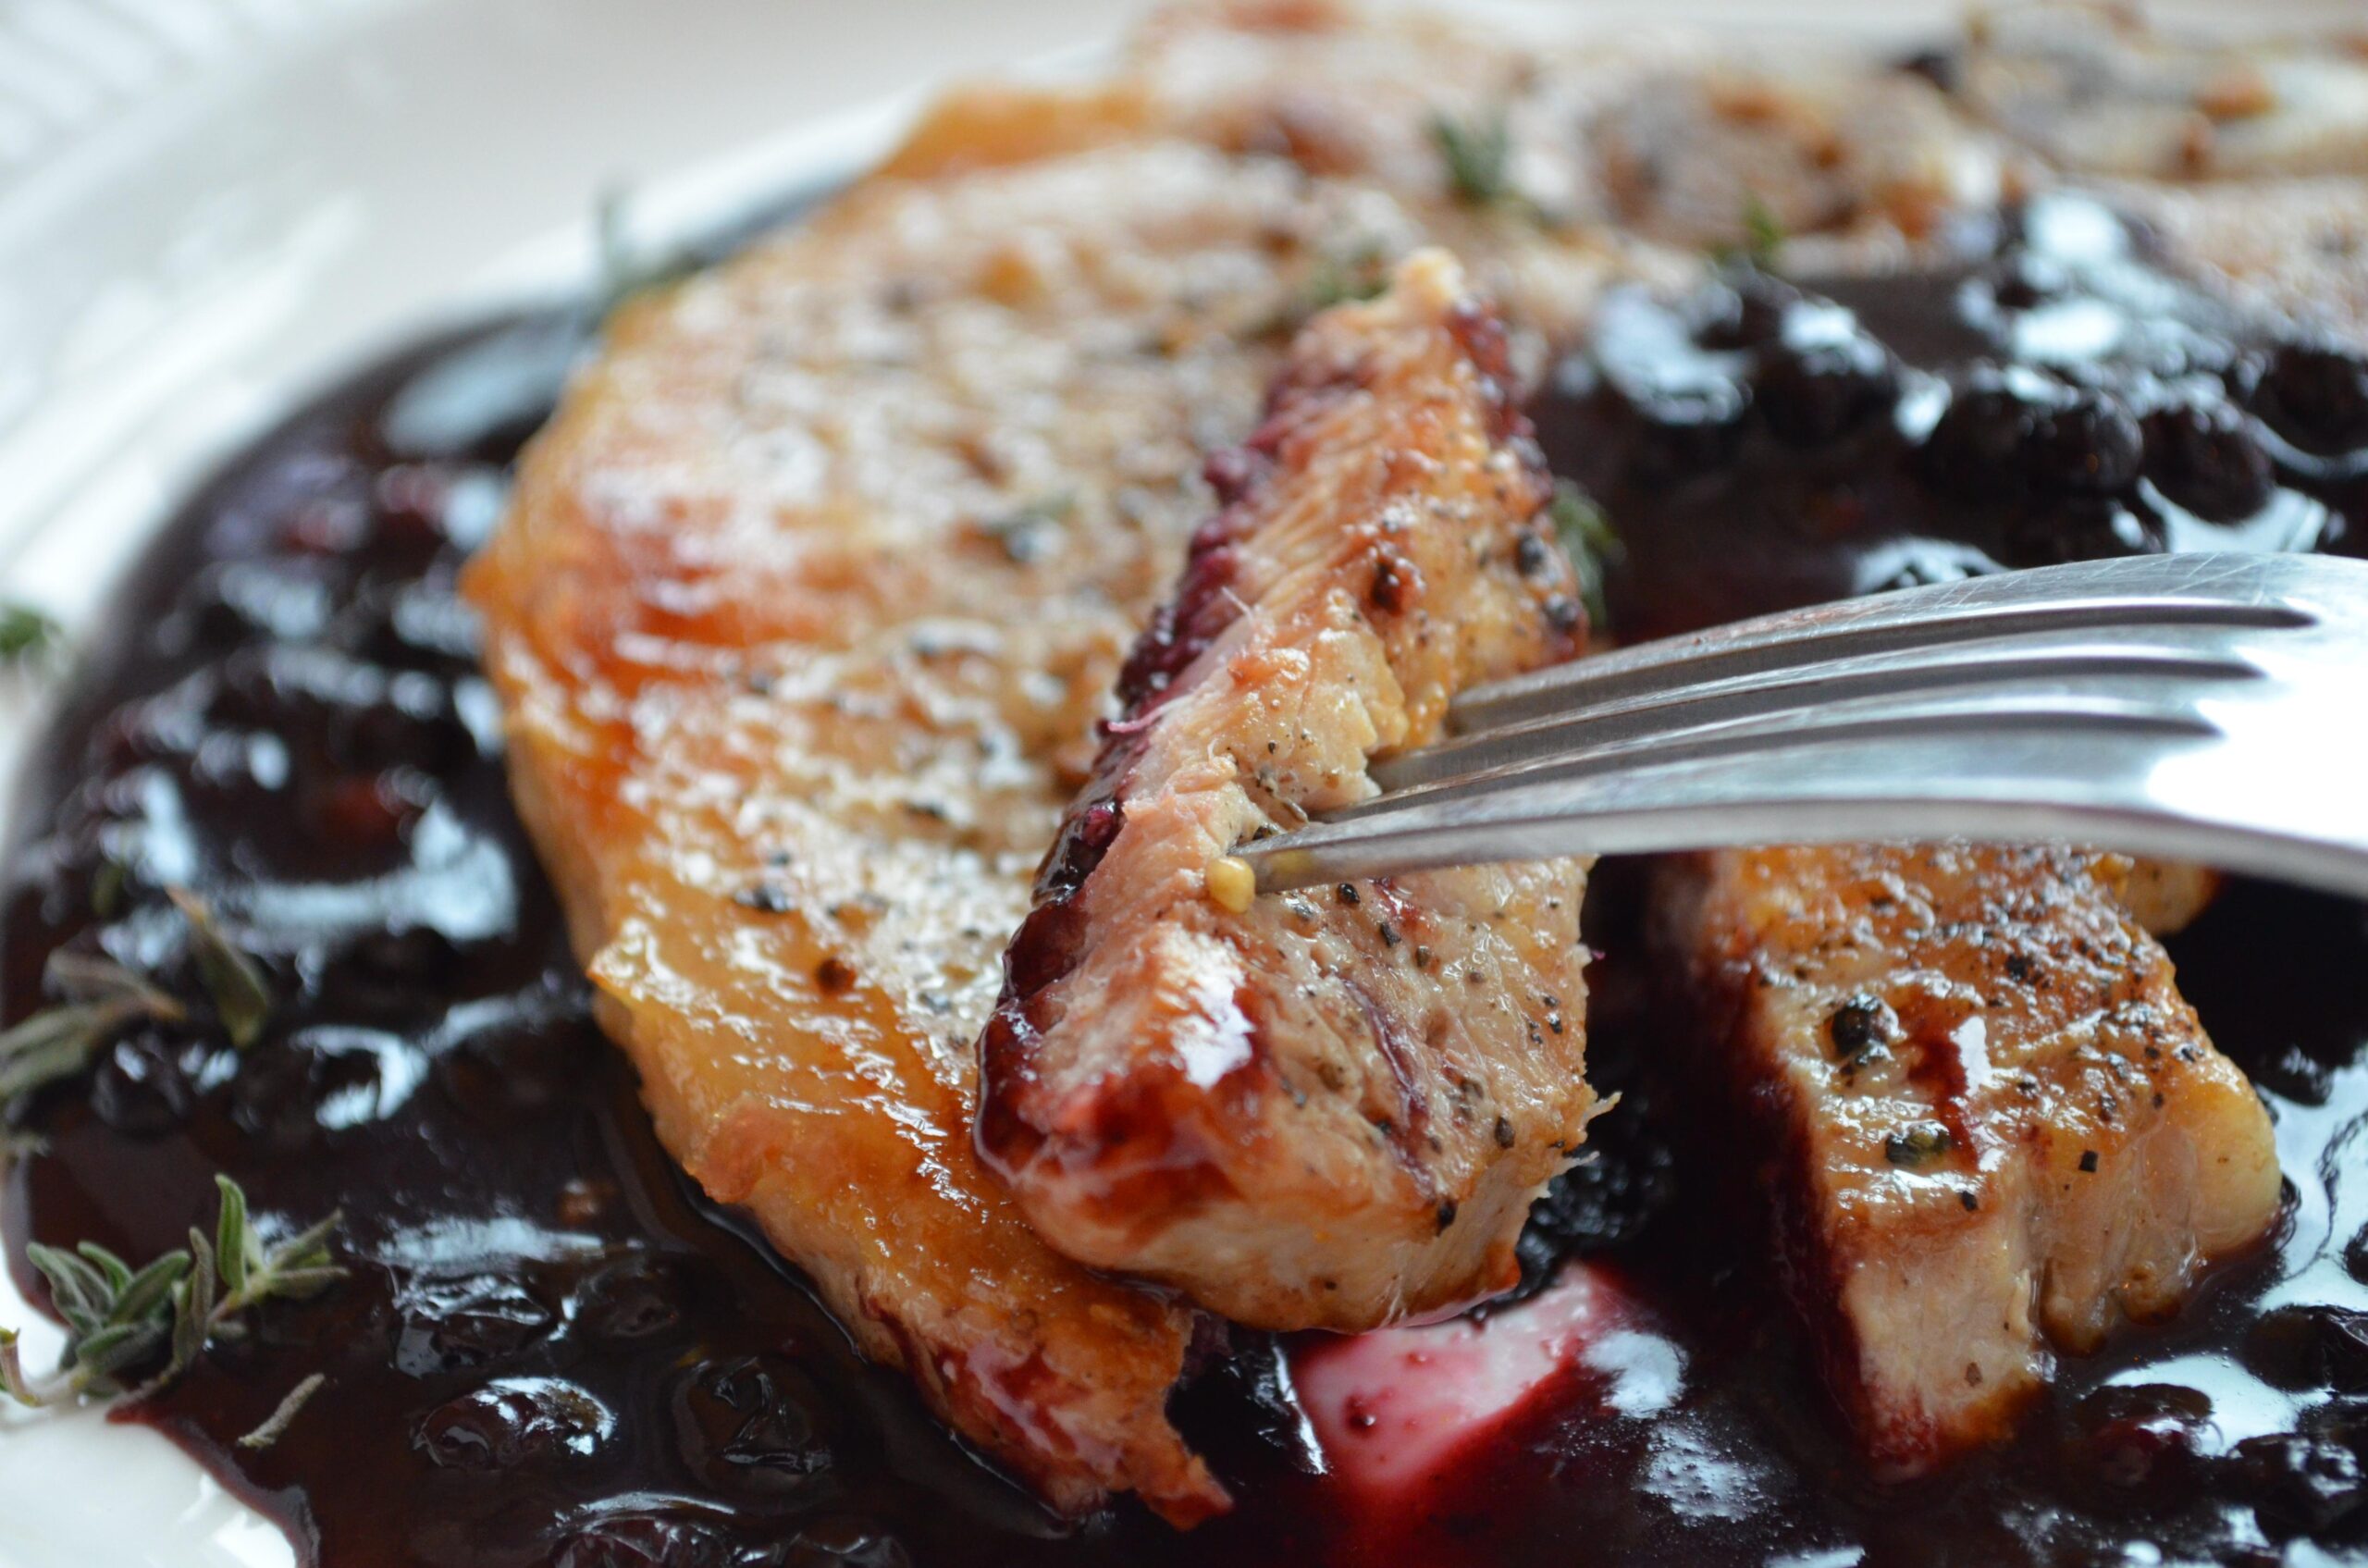  A drizzle of balsamic reduction adds a tangy and sweet flavor to the dish.